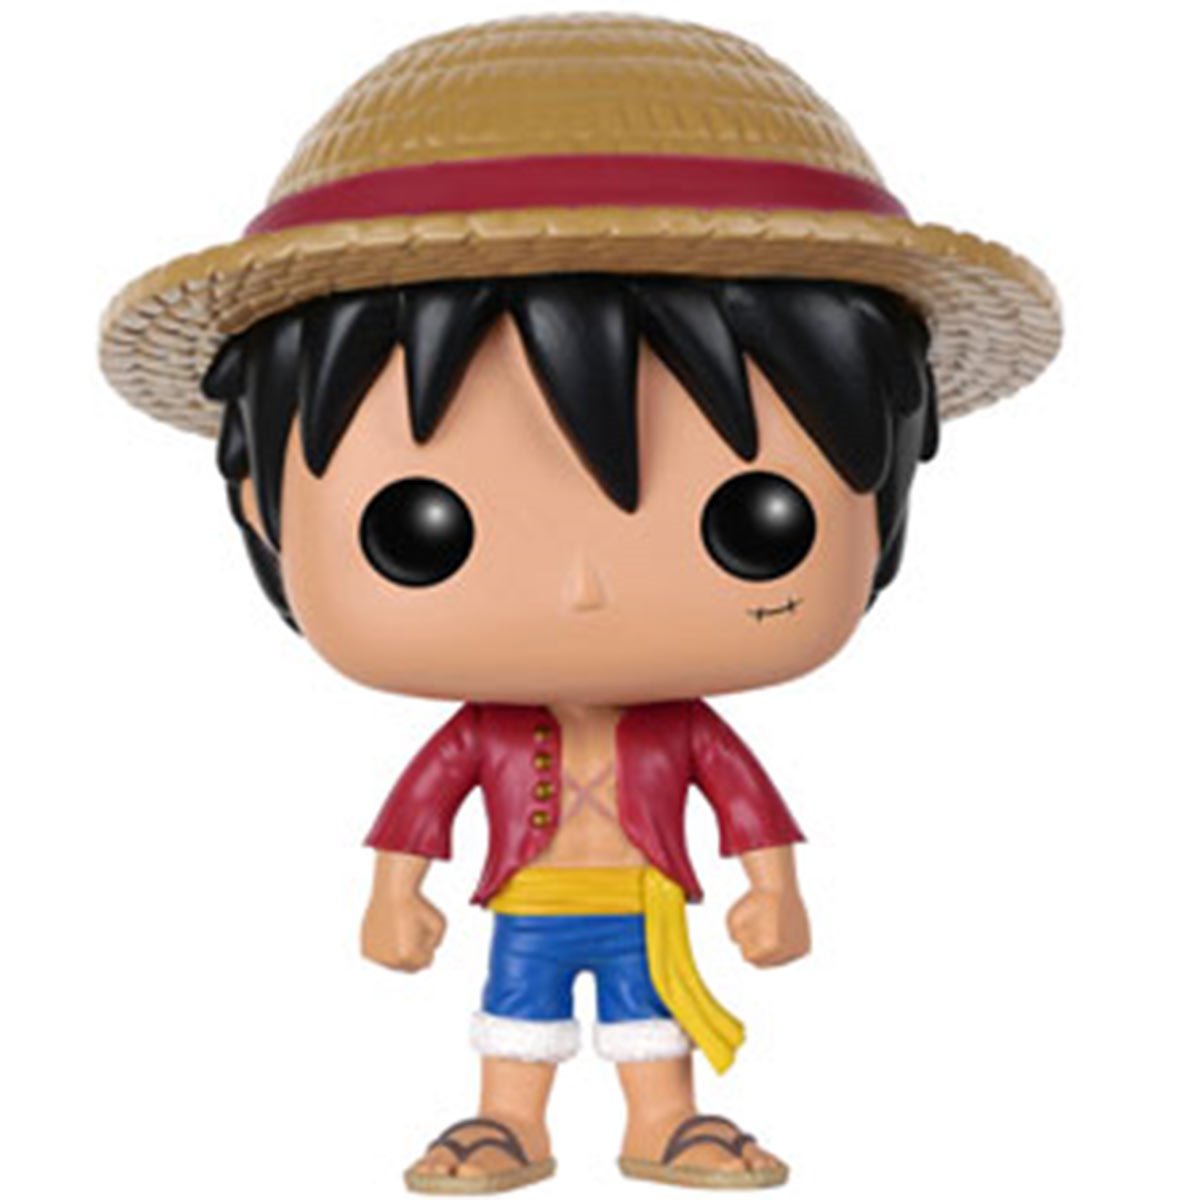 One Piece - Monkey. D. Luffy - POP! Animation action figure 98